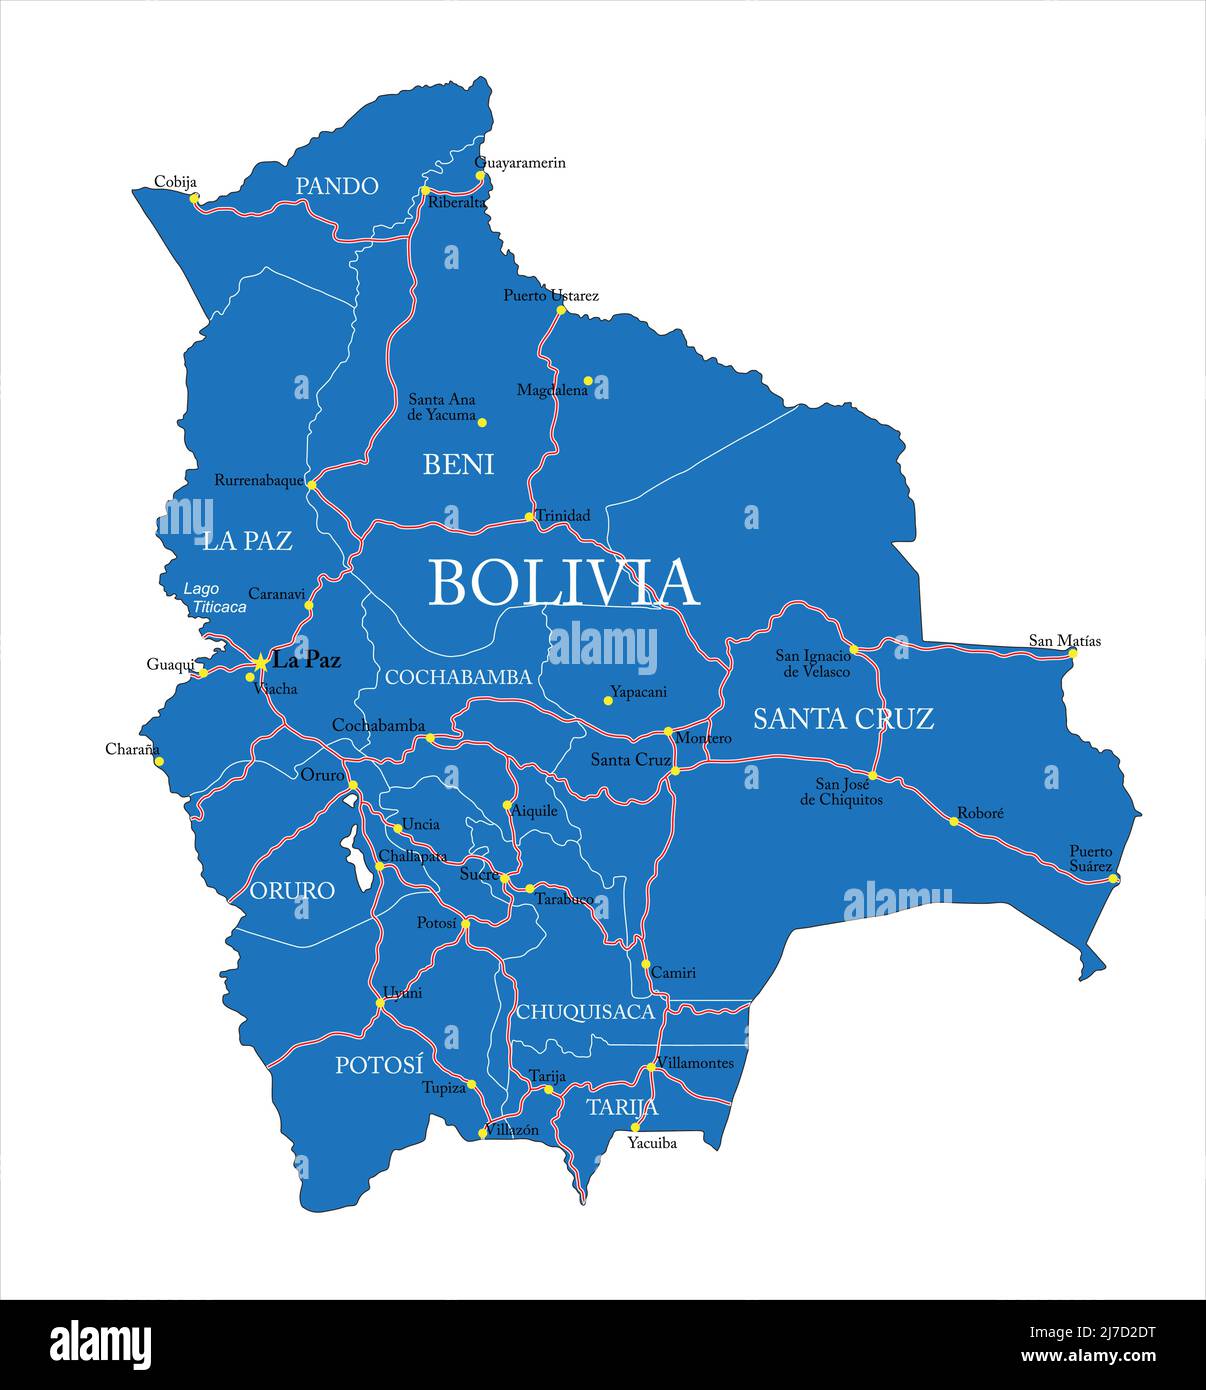 Highly detailed vector map of Bolivia with administrative regions, main cities and roads. Stock Vector